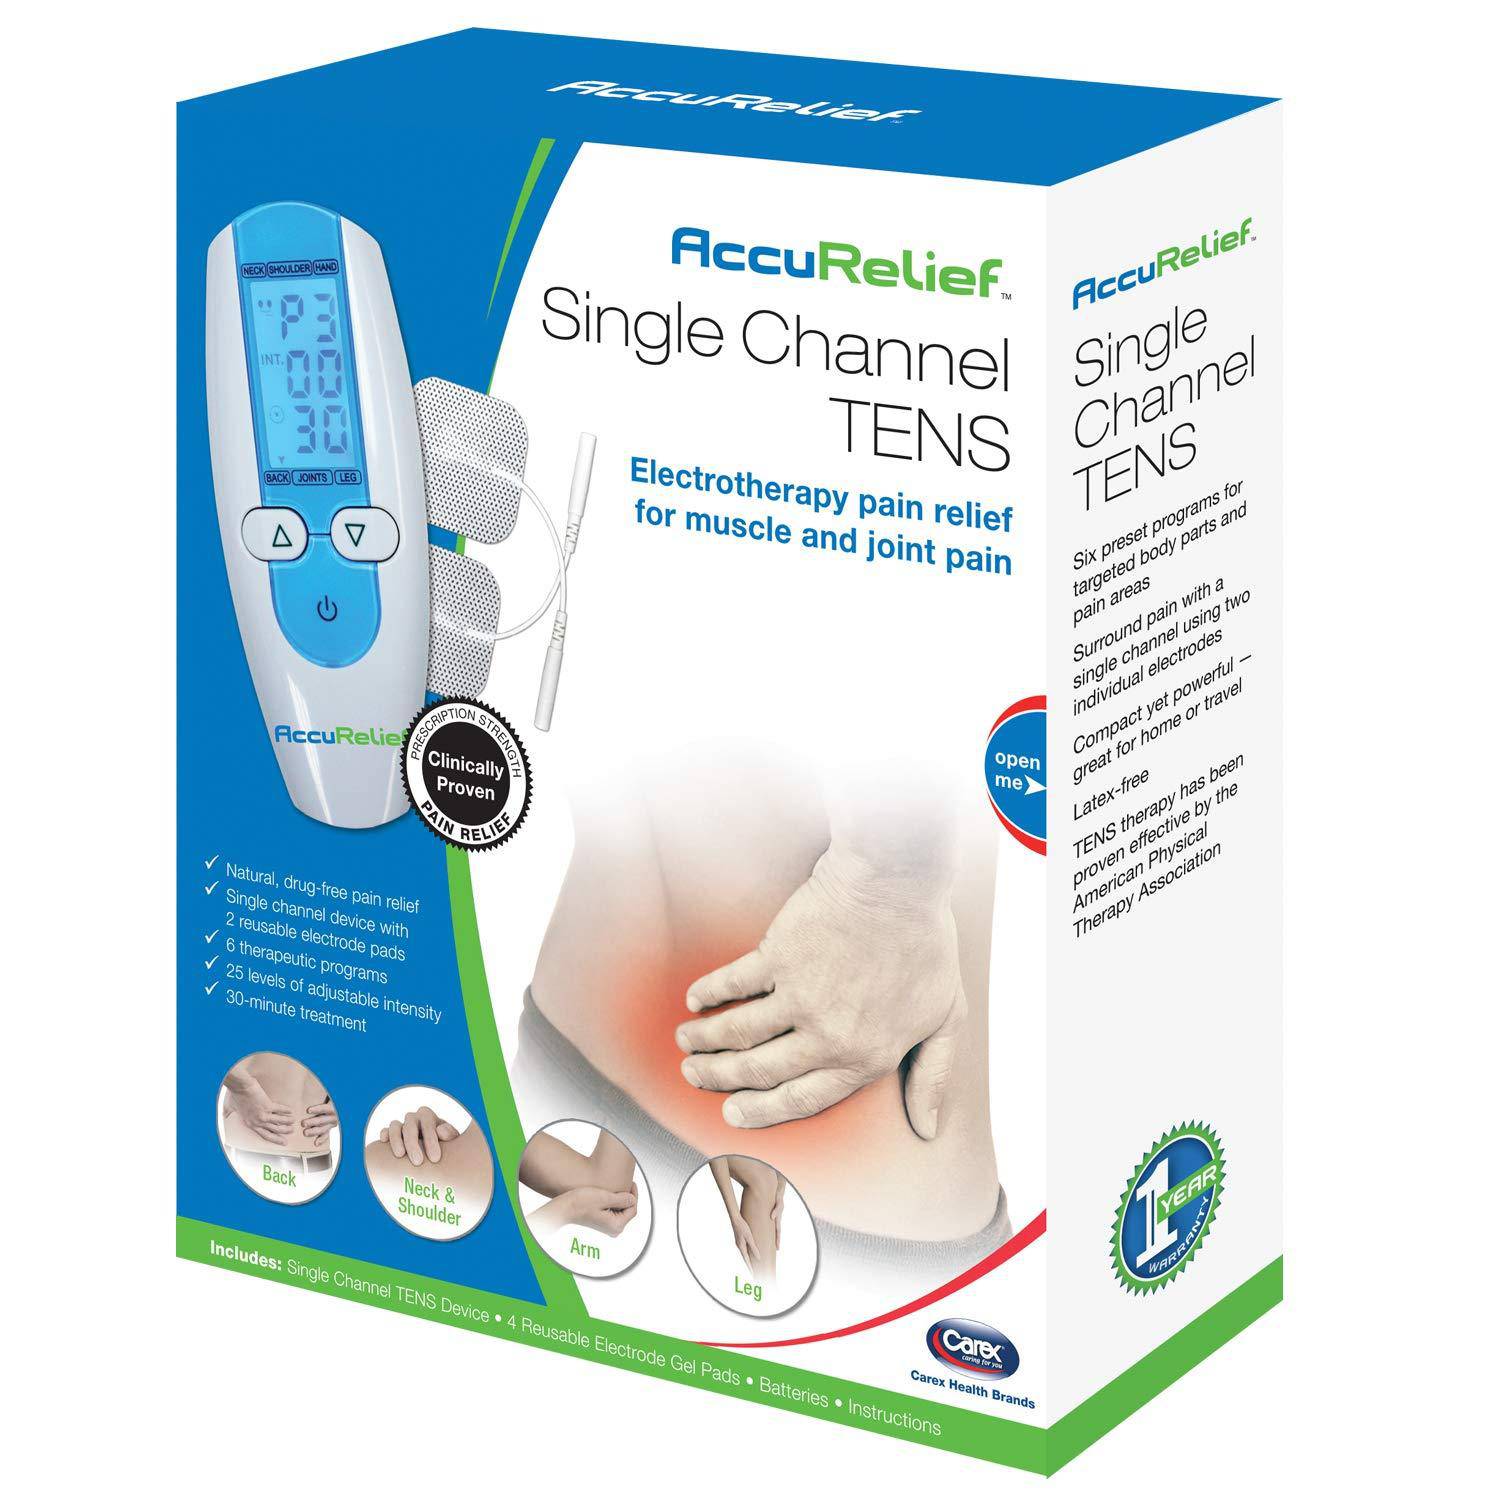 AccuRelief Dual Channel TENS Therapy Electrotherapy Pain Relief